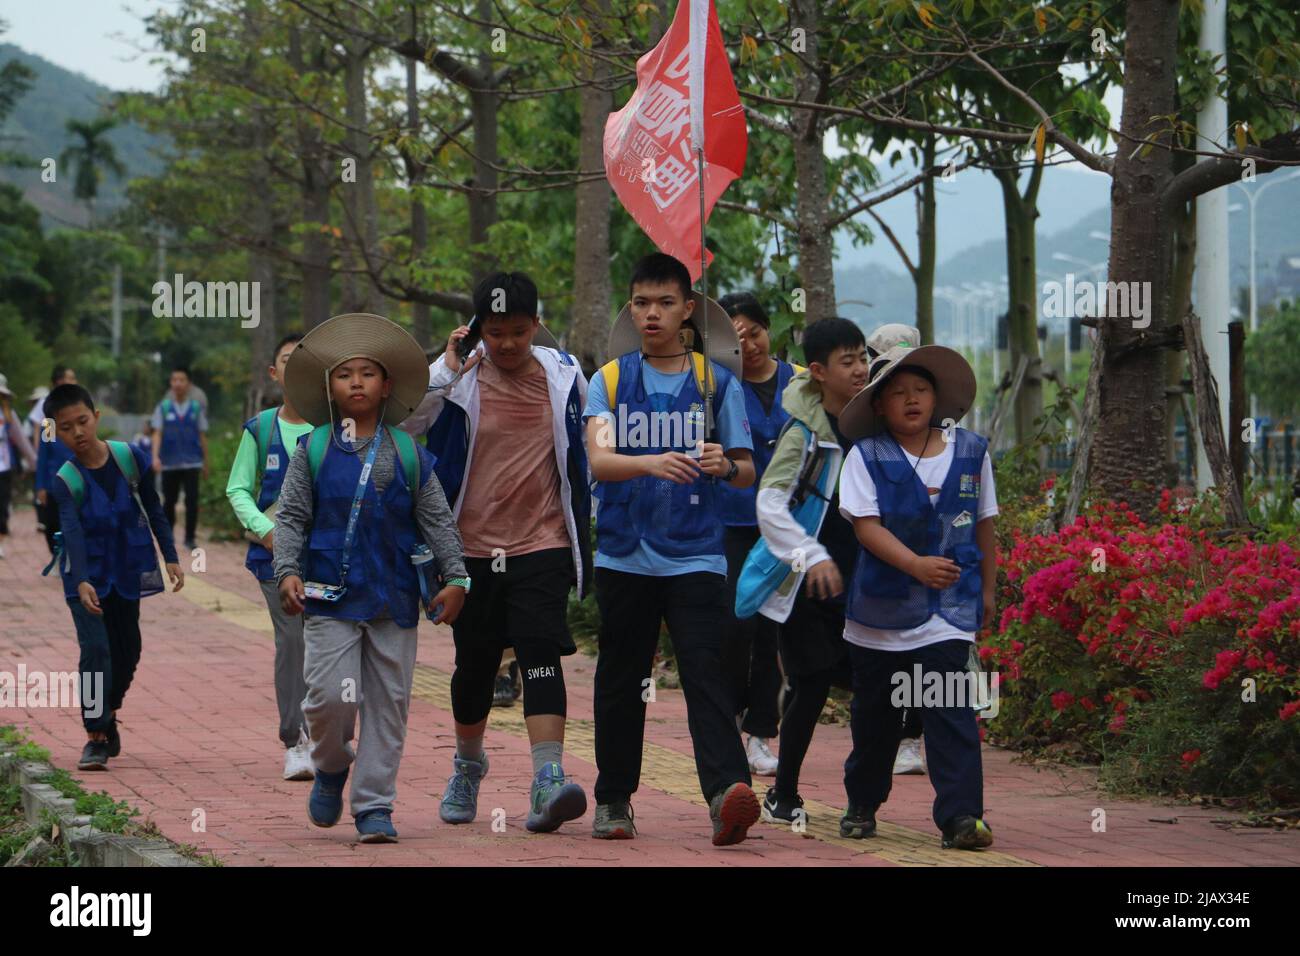 Haikou. 1st June, 2022. A group of children go hiking under the guidance of a coach in Sanya, south China's Hainan Province, Jan. 18, 2022. TO GO WITH 'China Focus: Outdoor training courses a class act for children in Hainan' Credit: Xinhua/Alamy Live News Stock Photo